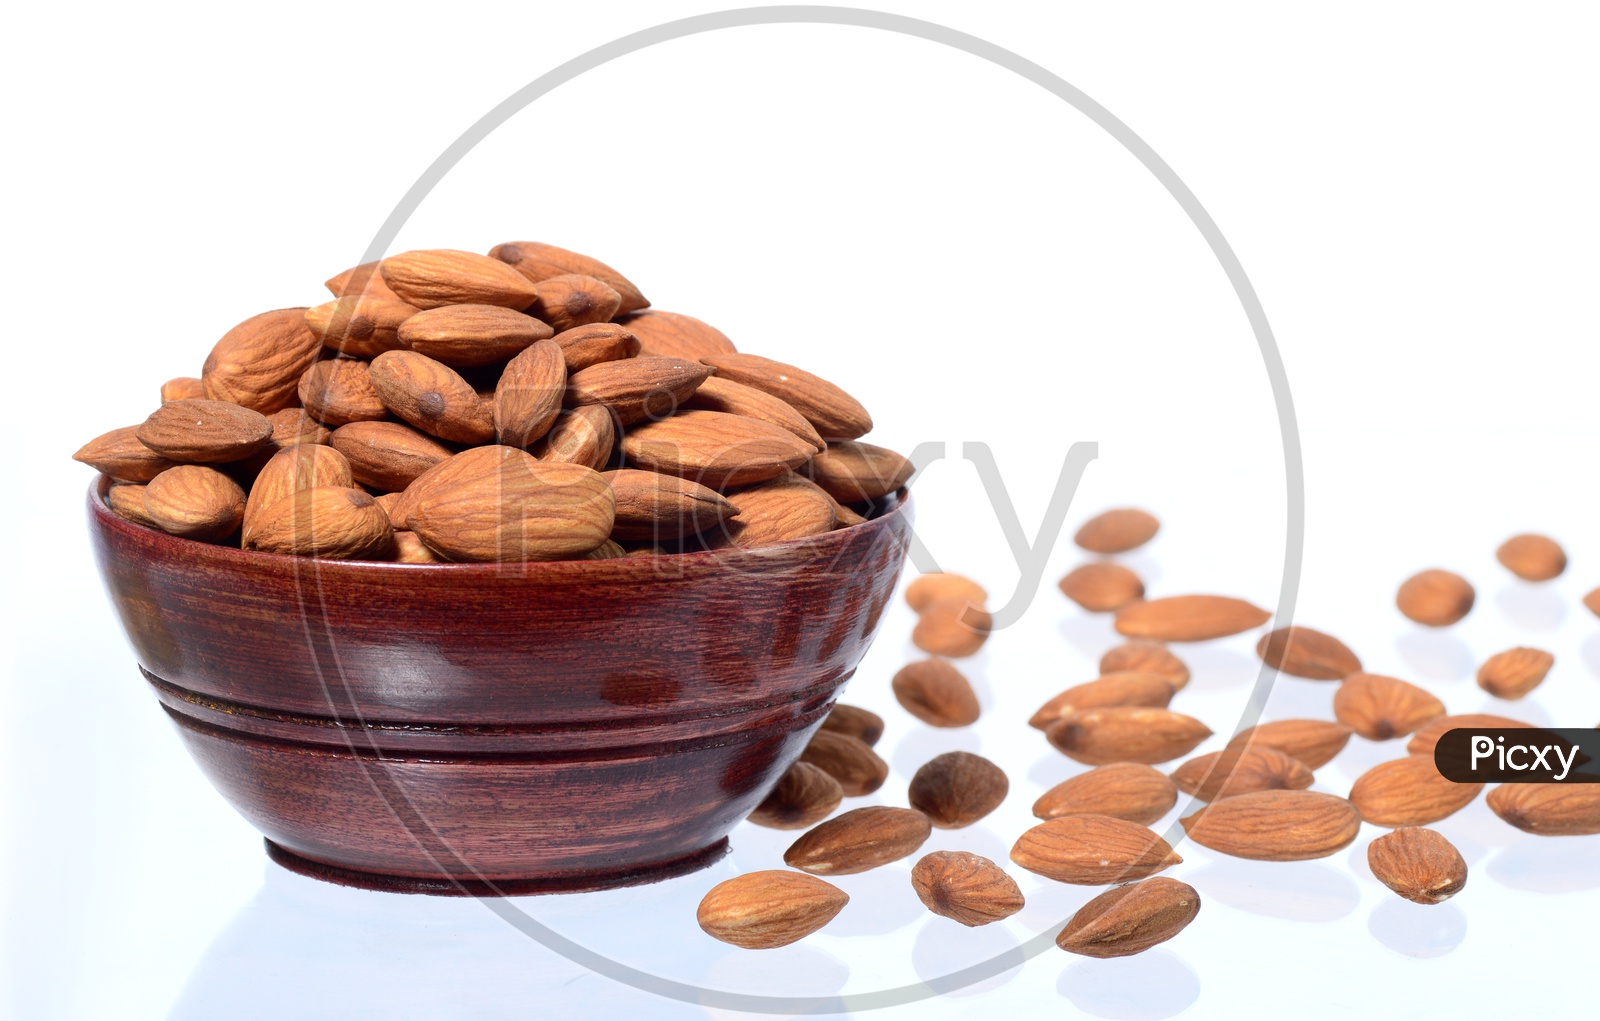 Almonds Or Badam Nuts In a Wooden  Bowl With a Heap On an Isolated White background